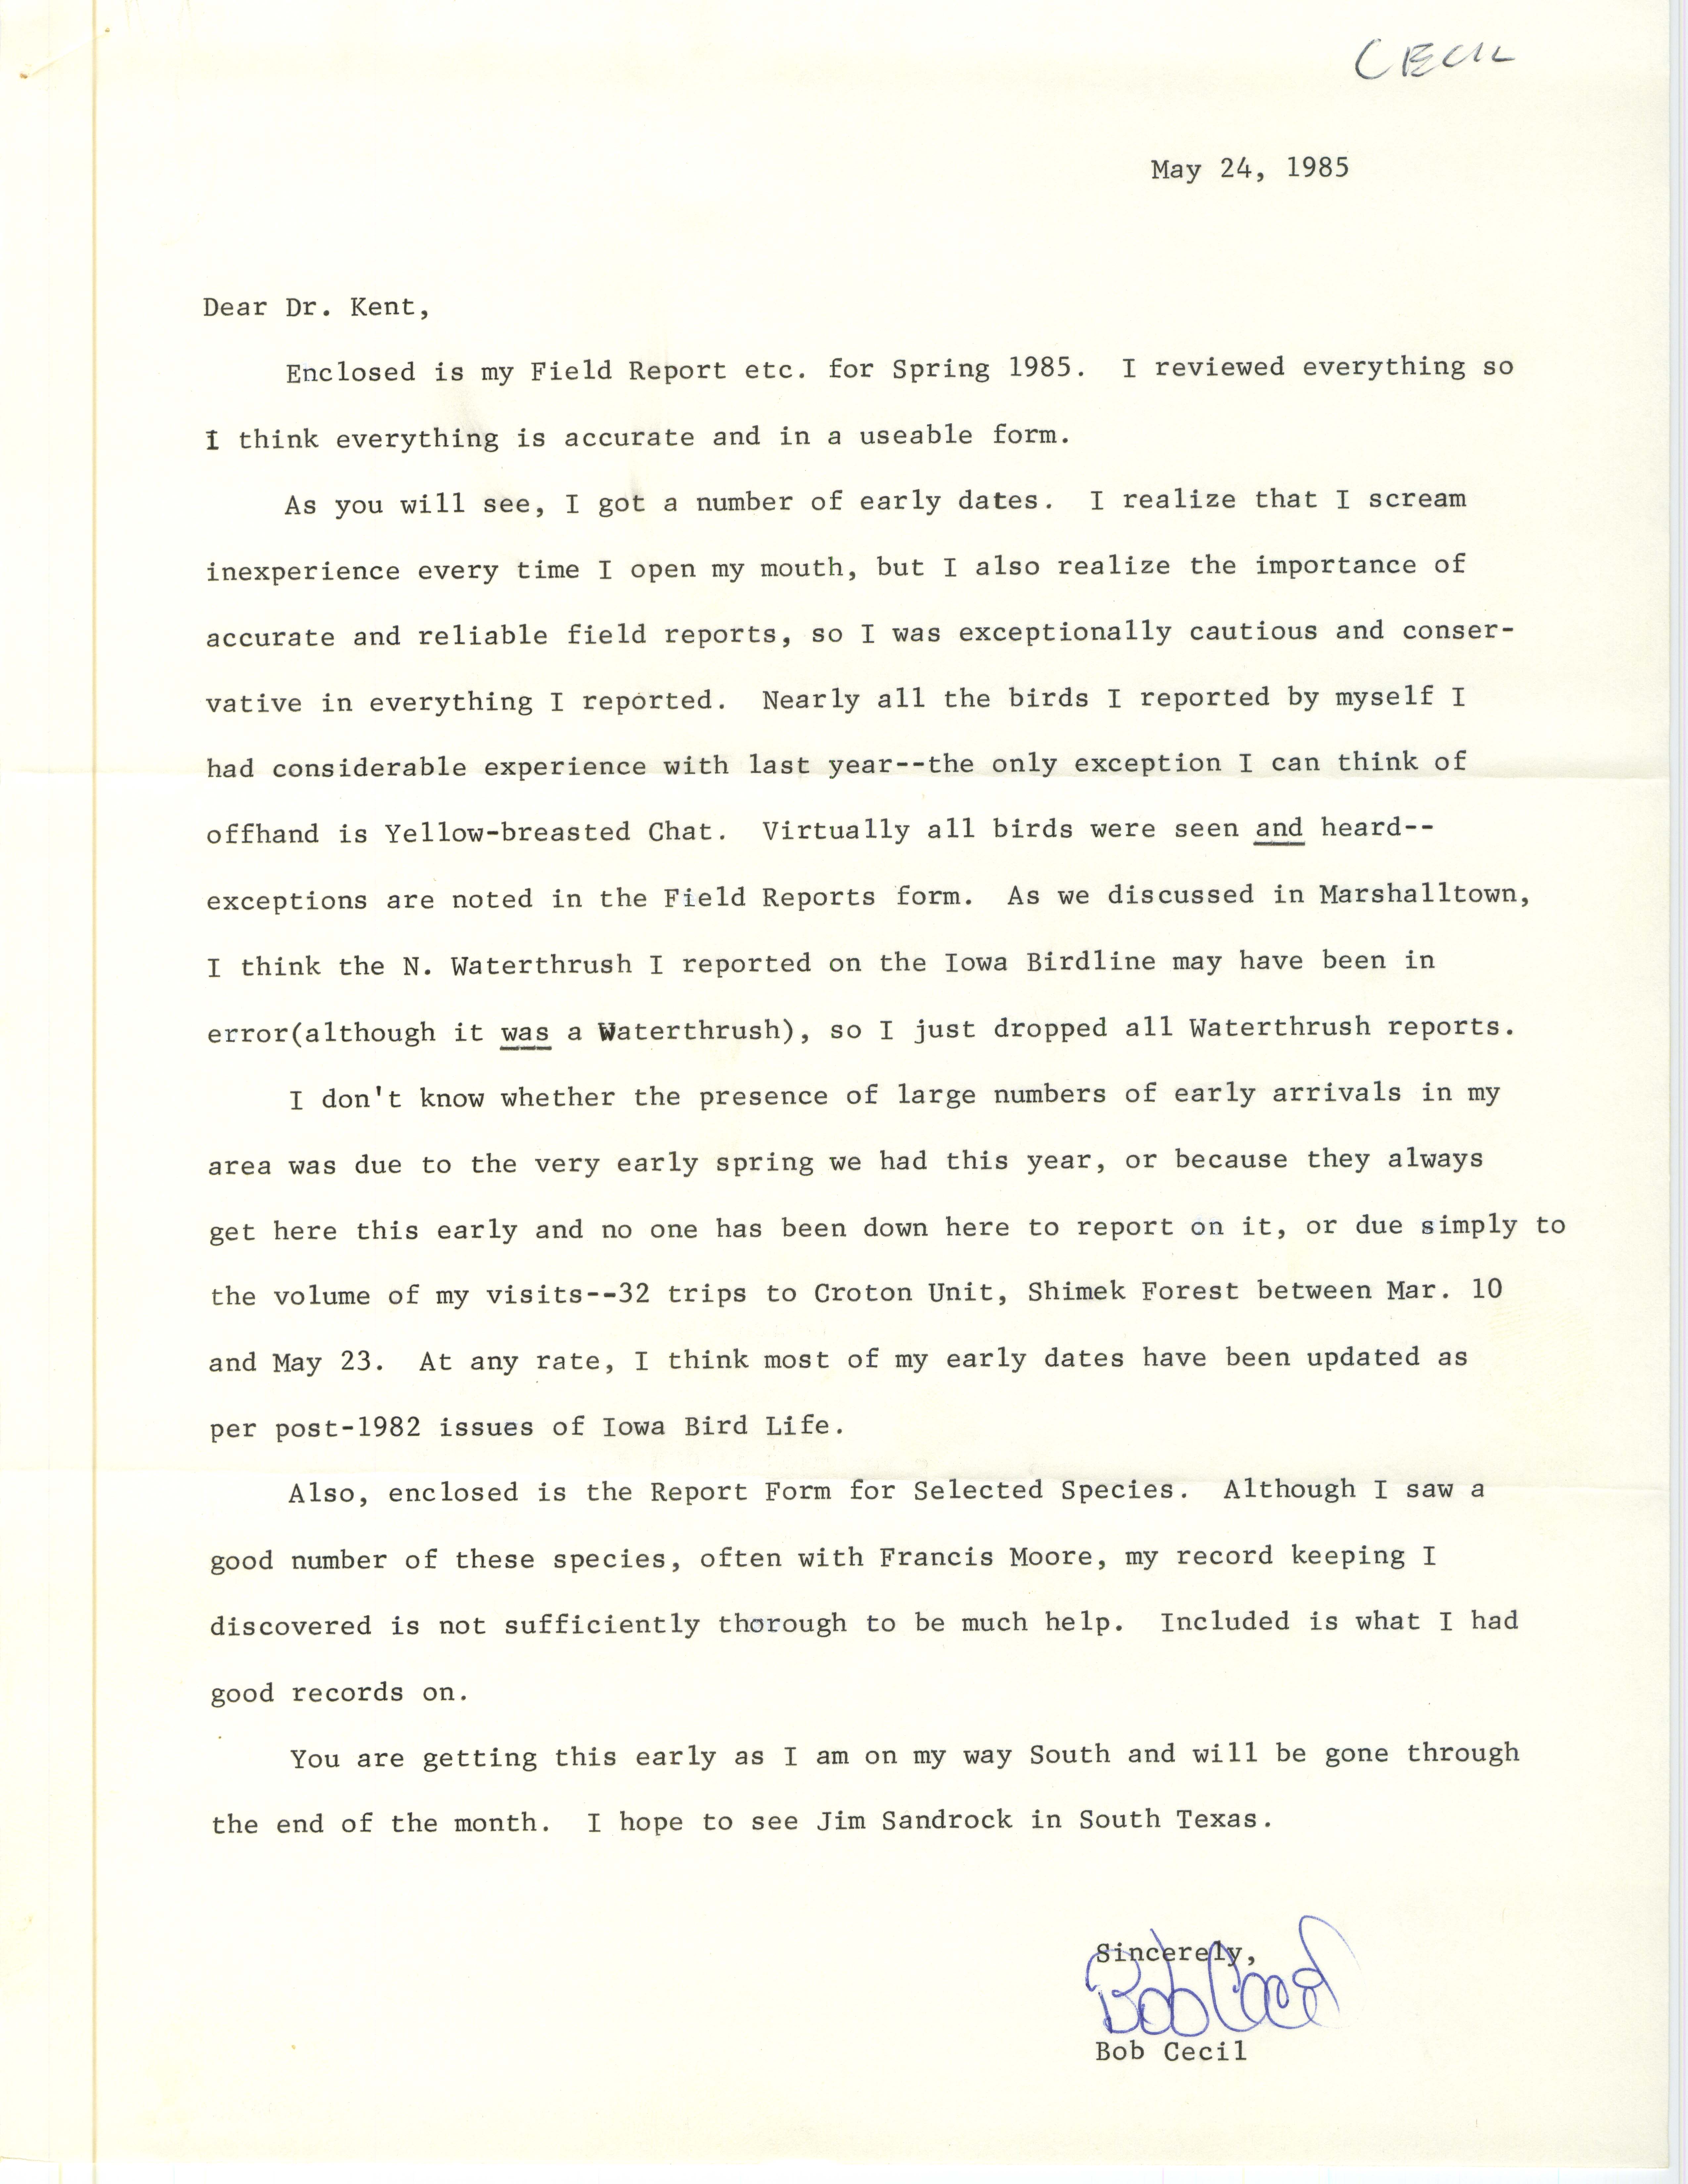 Robert I. Cecil letter to Thomas H. Kent regarding accompanying field notes, May 24, 1985